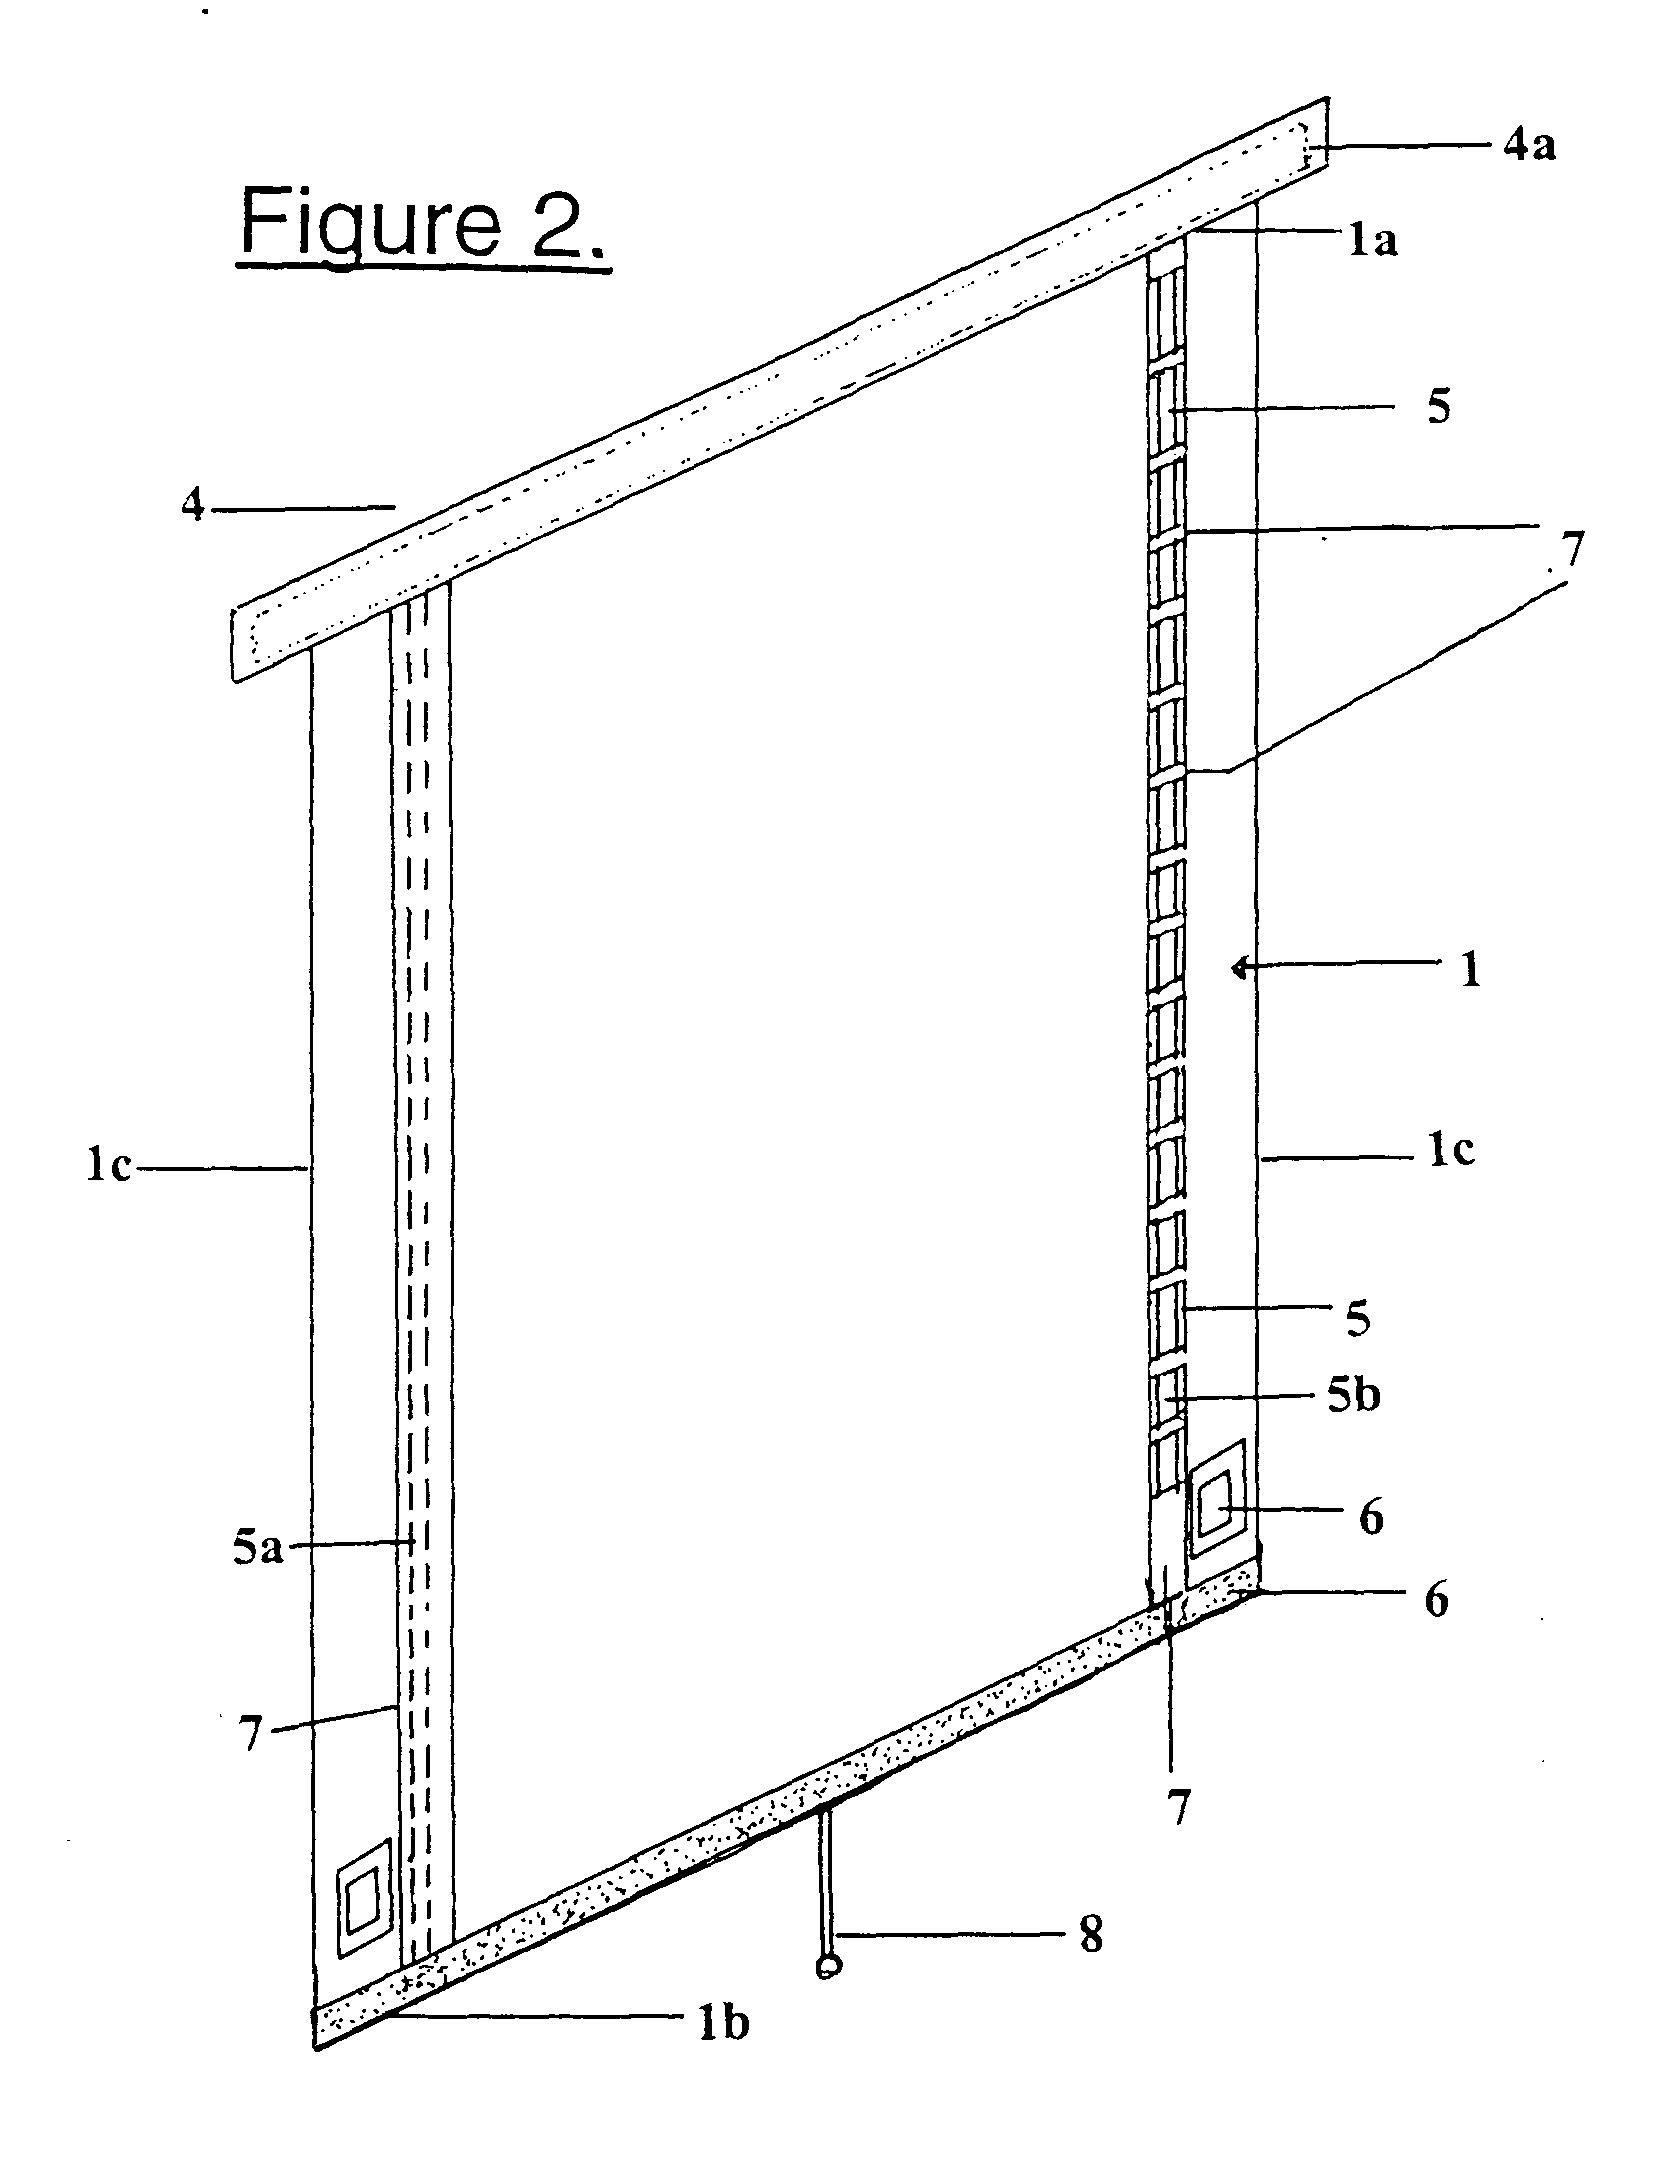 Retractable cover with biasing mechanism for covering structures